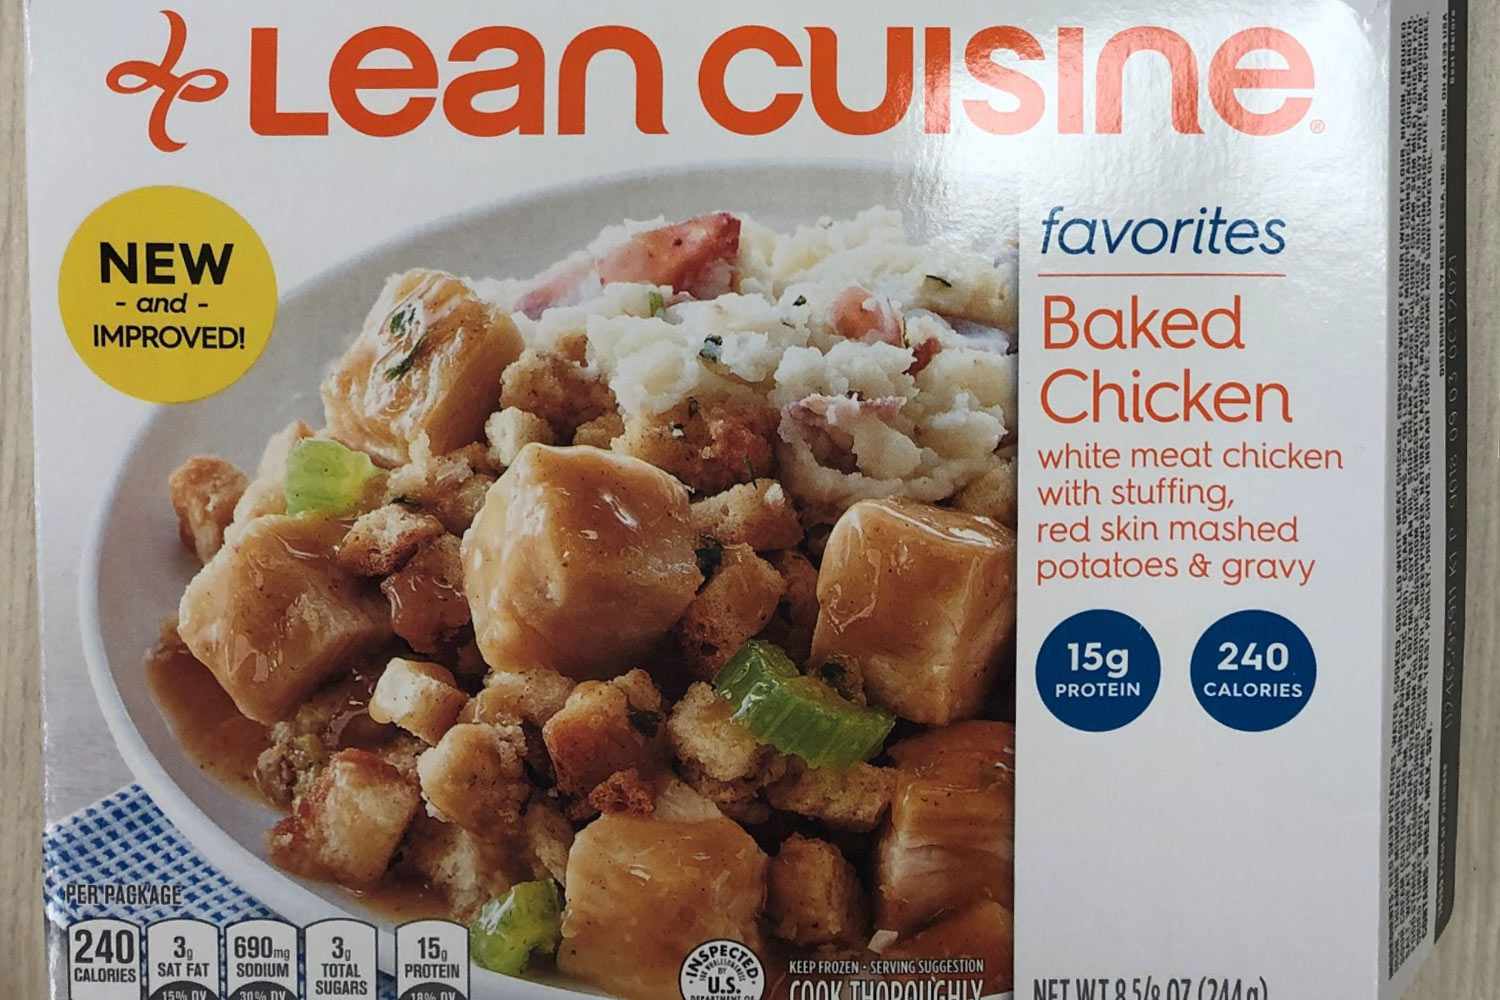 Nestlé Prepared Foods Recalls Lean Cuisine Baked Chicken Meal Products Due to Possible Foreign Matter Contamination